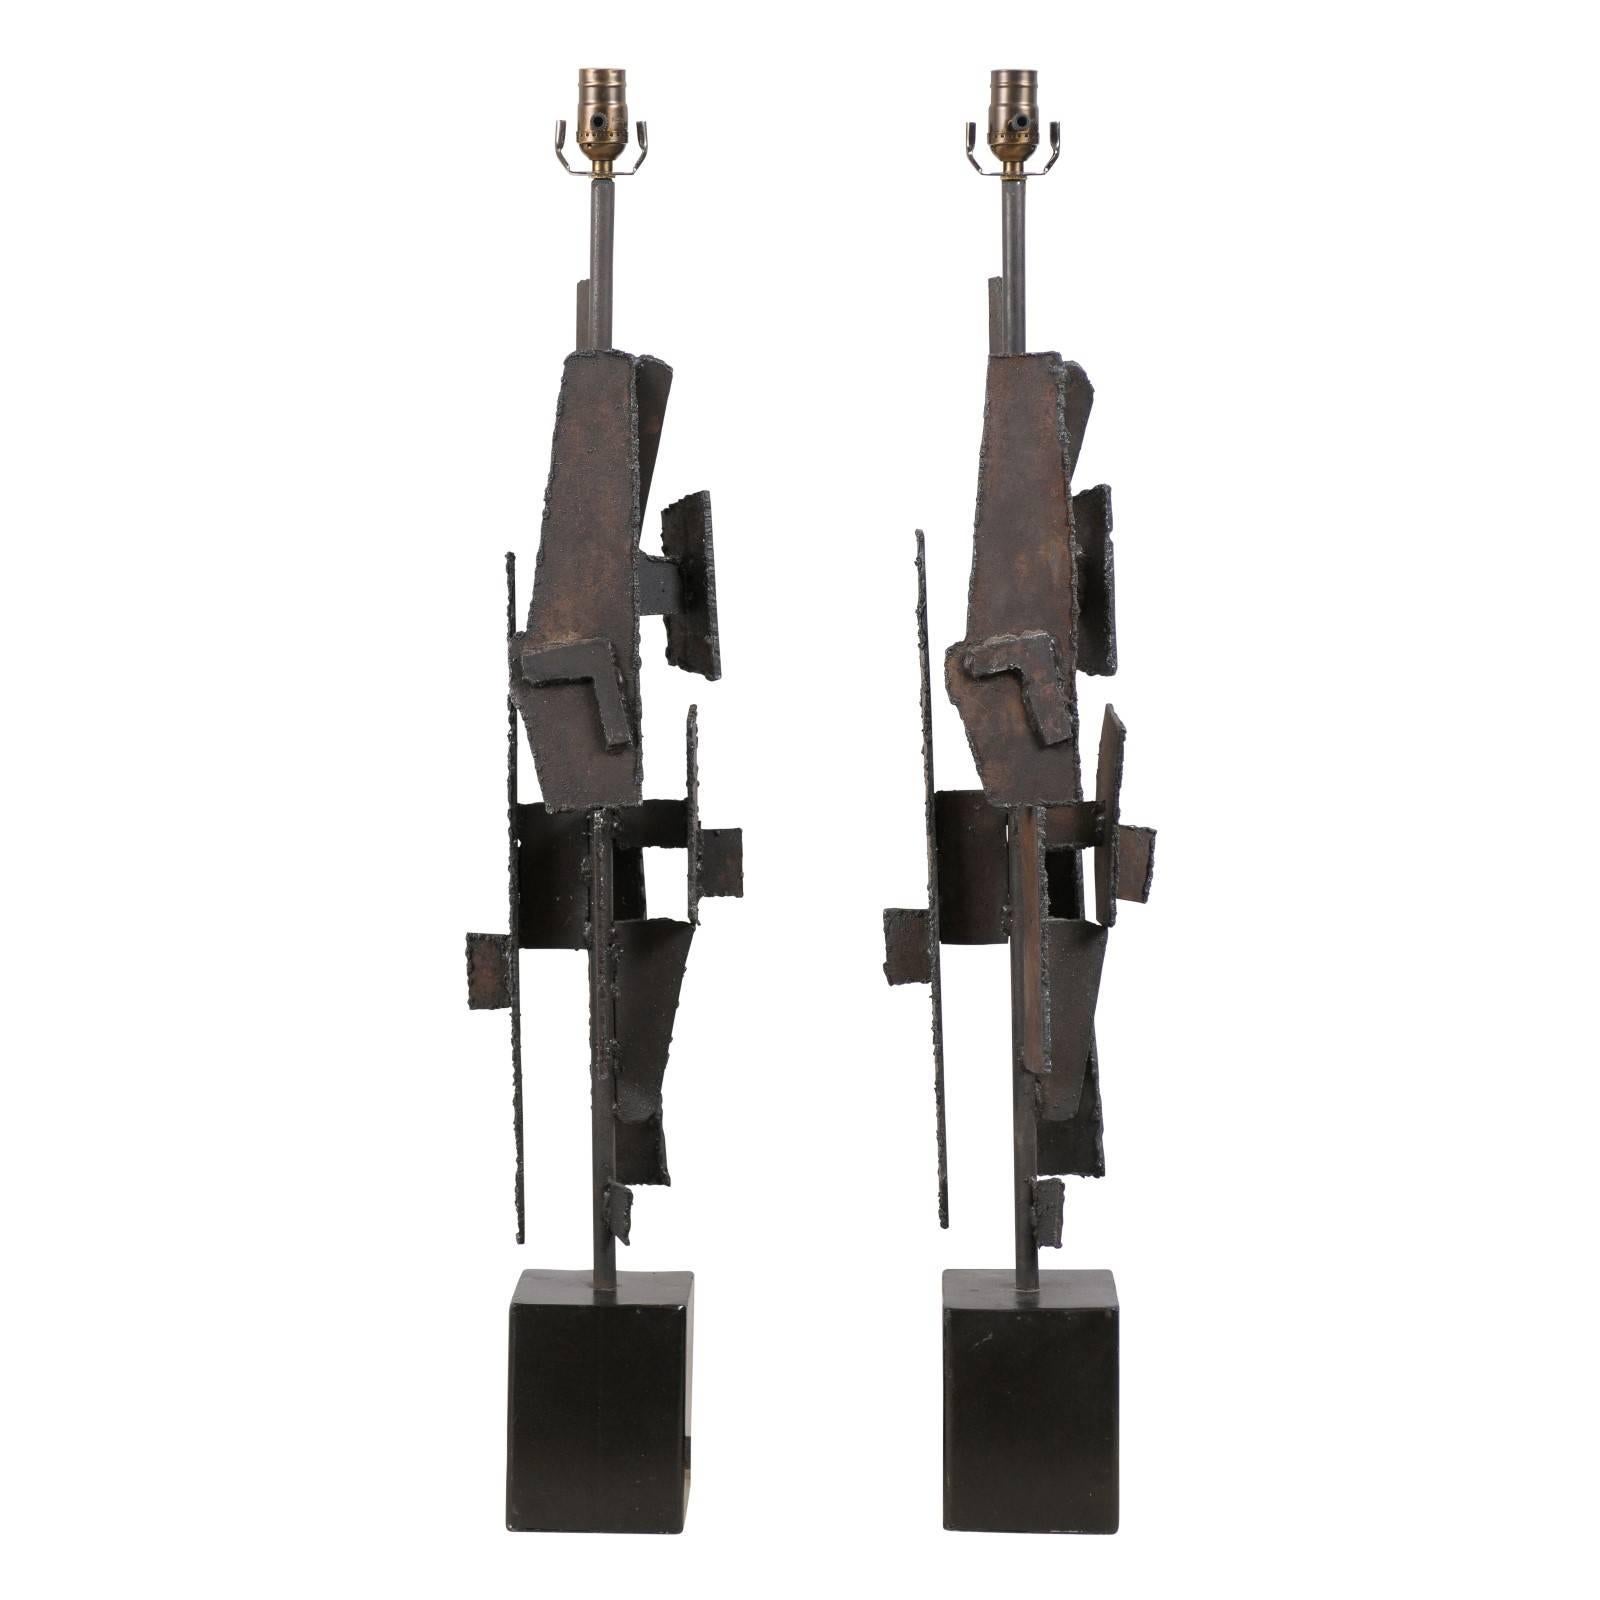 Pair of Harry Balmer Modern Style Table Lamps from the Brutalist Movement